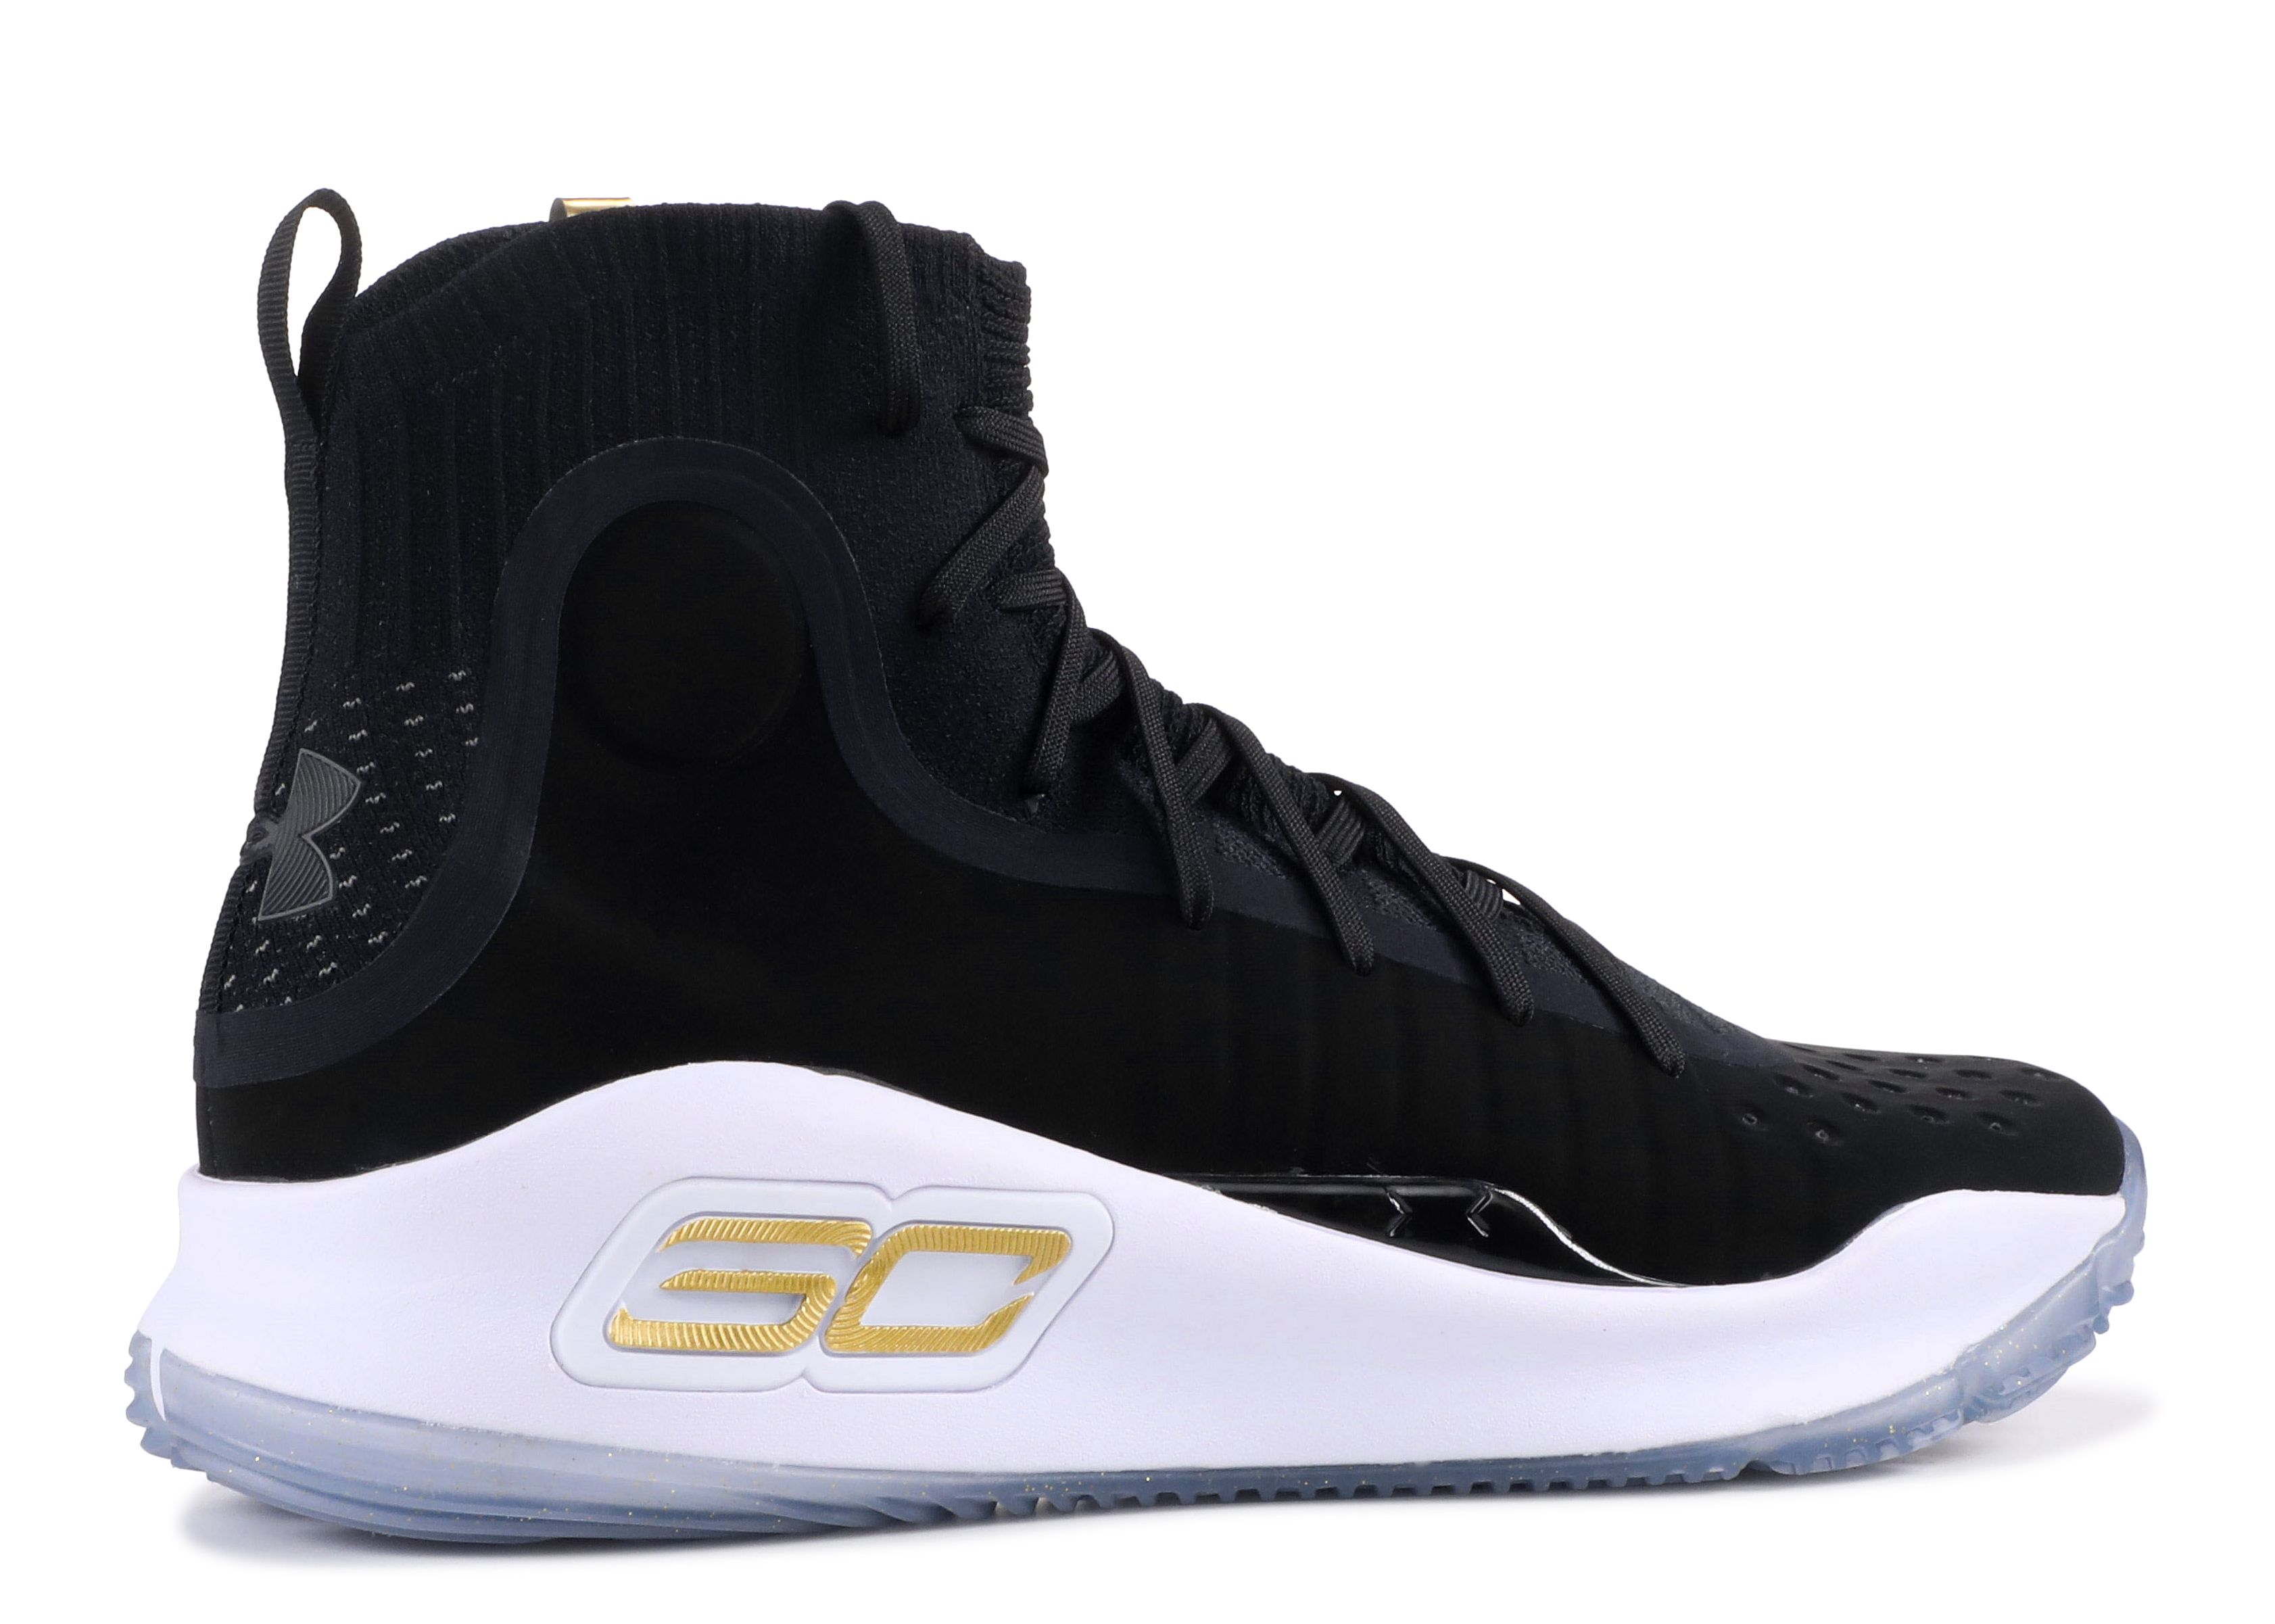 Under Armour Curry 4. Under Armour GS Curry 4. Curry 4 flot Pro. Ua Curry Championship Pack. Карри 4